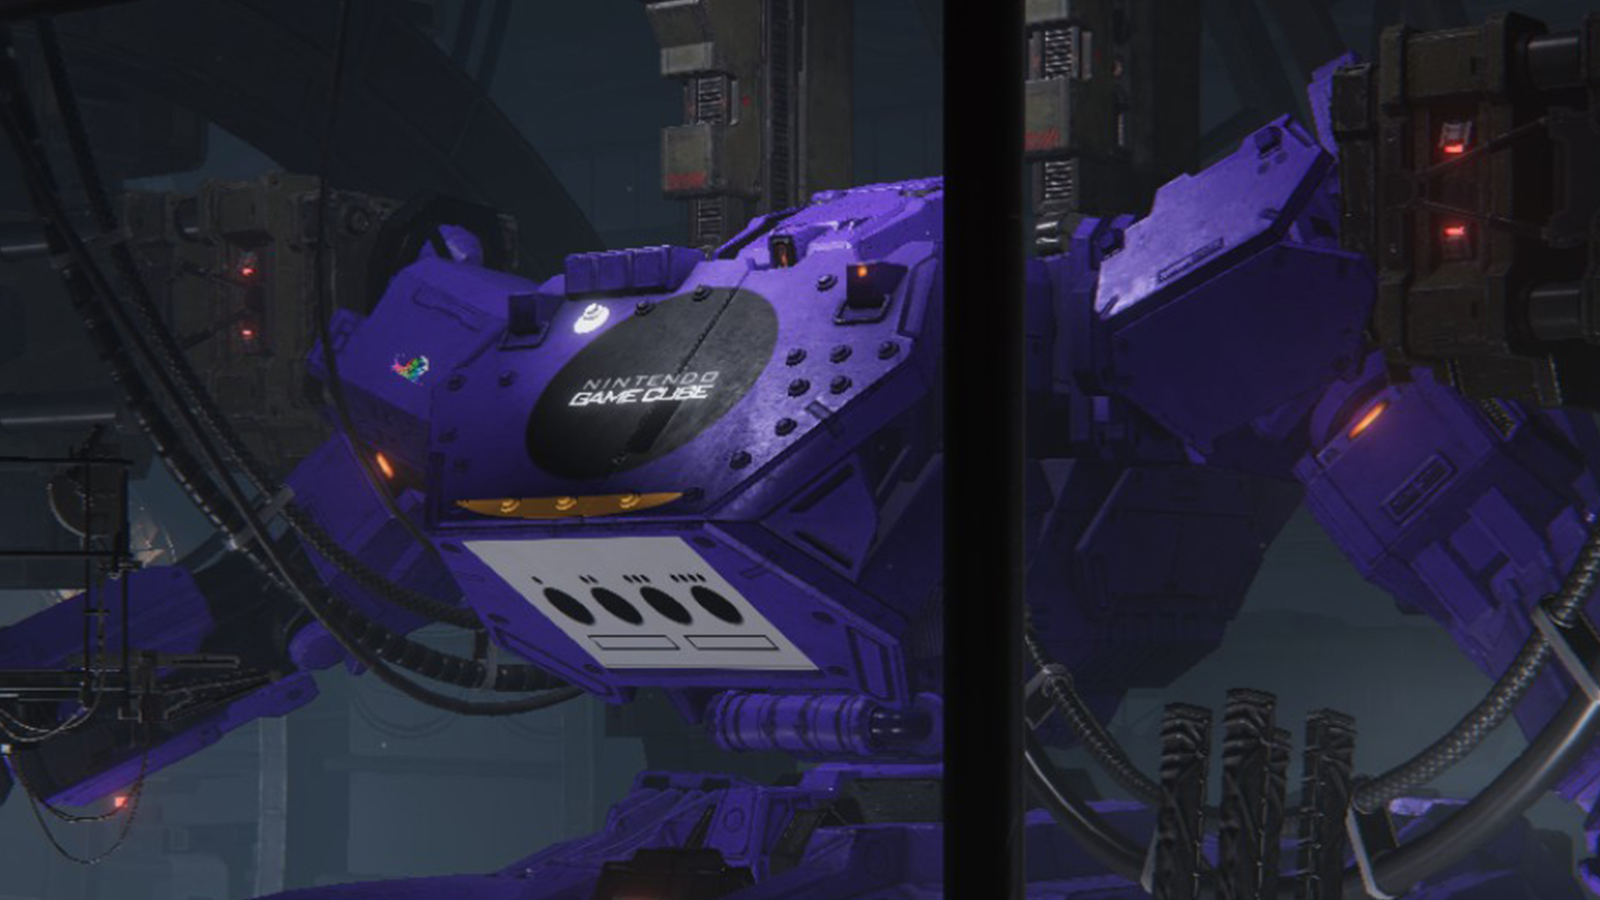 This is an excellent GameCube-inspired mech in one other Armored Core 6 Showcase